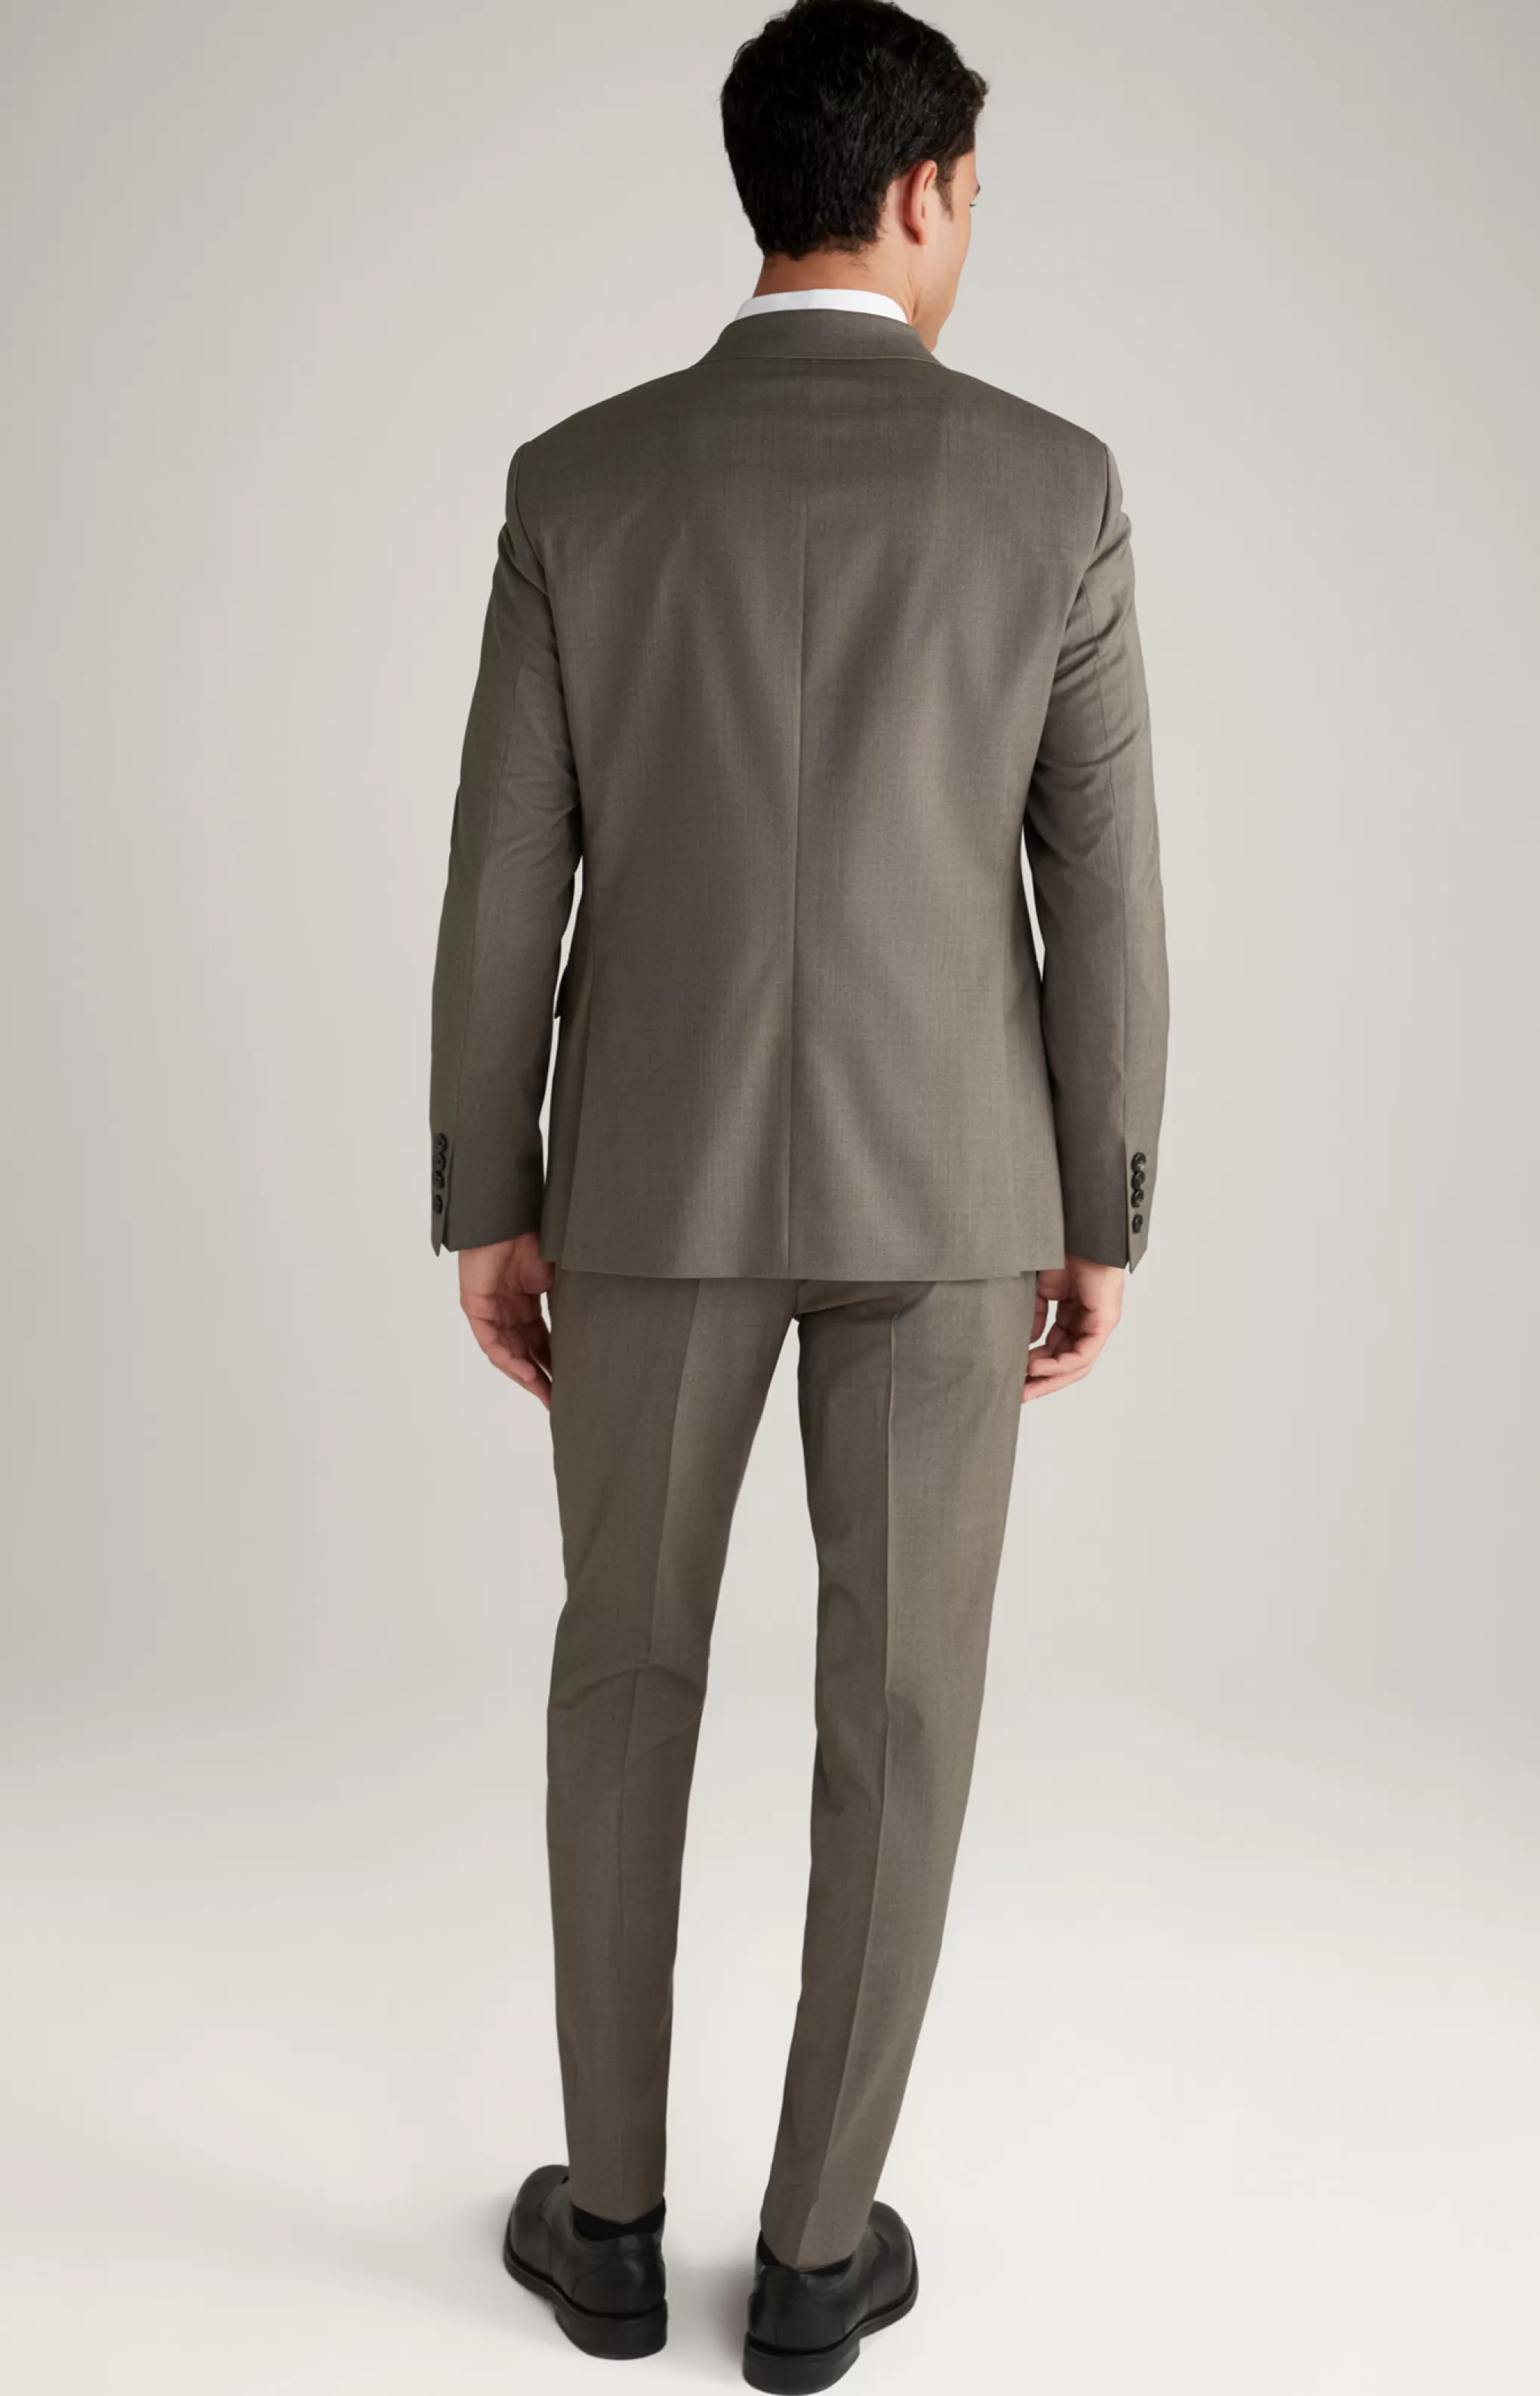 Suits | Clothing*JOOP Suits | Clothing Herby-Blayr Suit in Beige/Grey